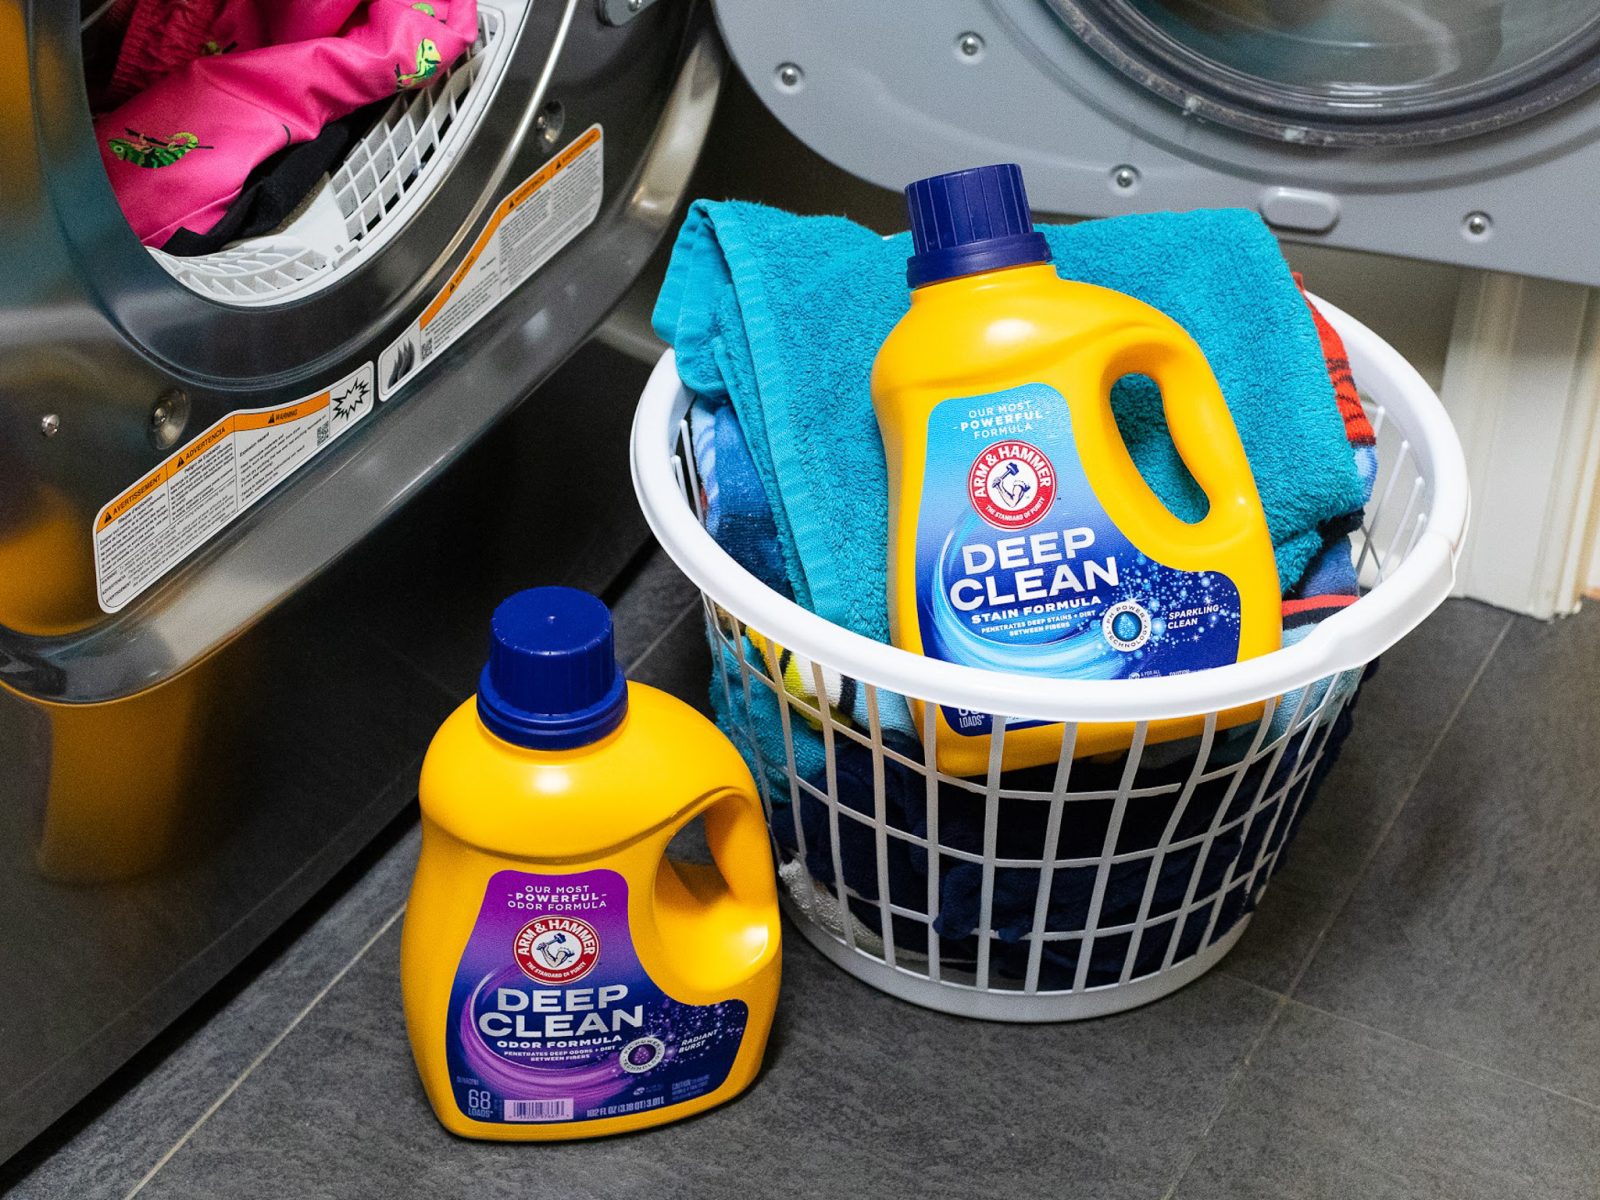 Get ARM & HAMMER Deep Clean For Less Than Half Price – Only $4.99 At Kroger